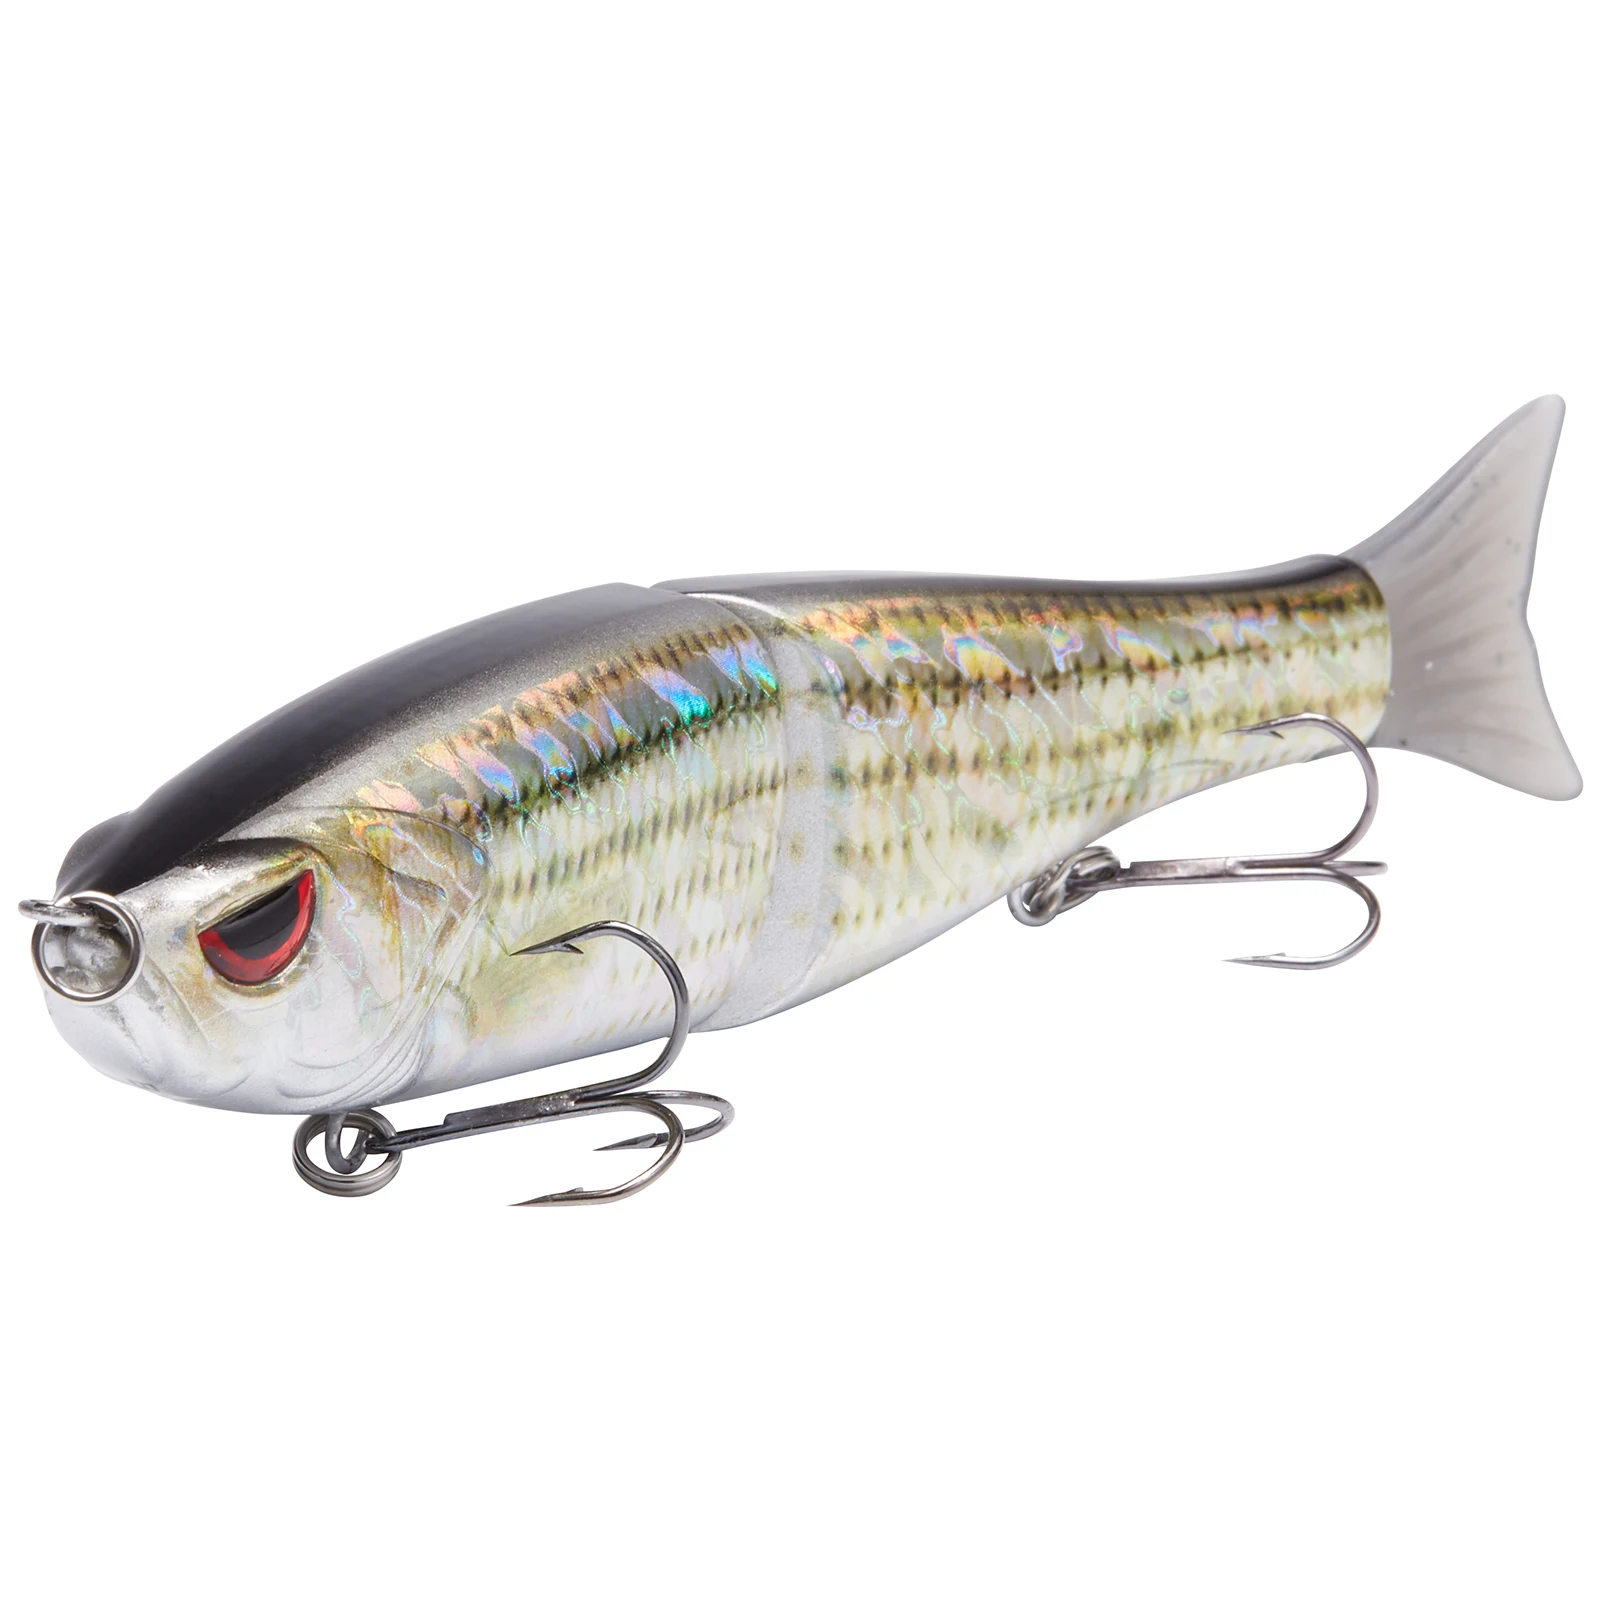 Bassdash Glide Baits for Pike Salmon Trout Topwater Single-Jointed